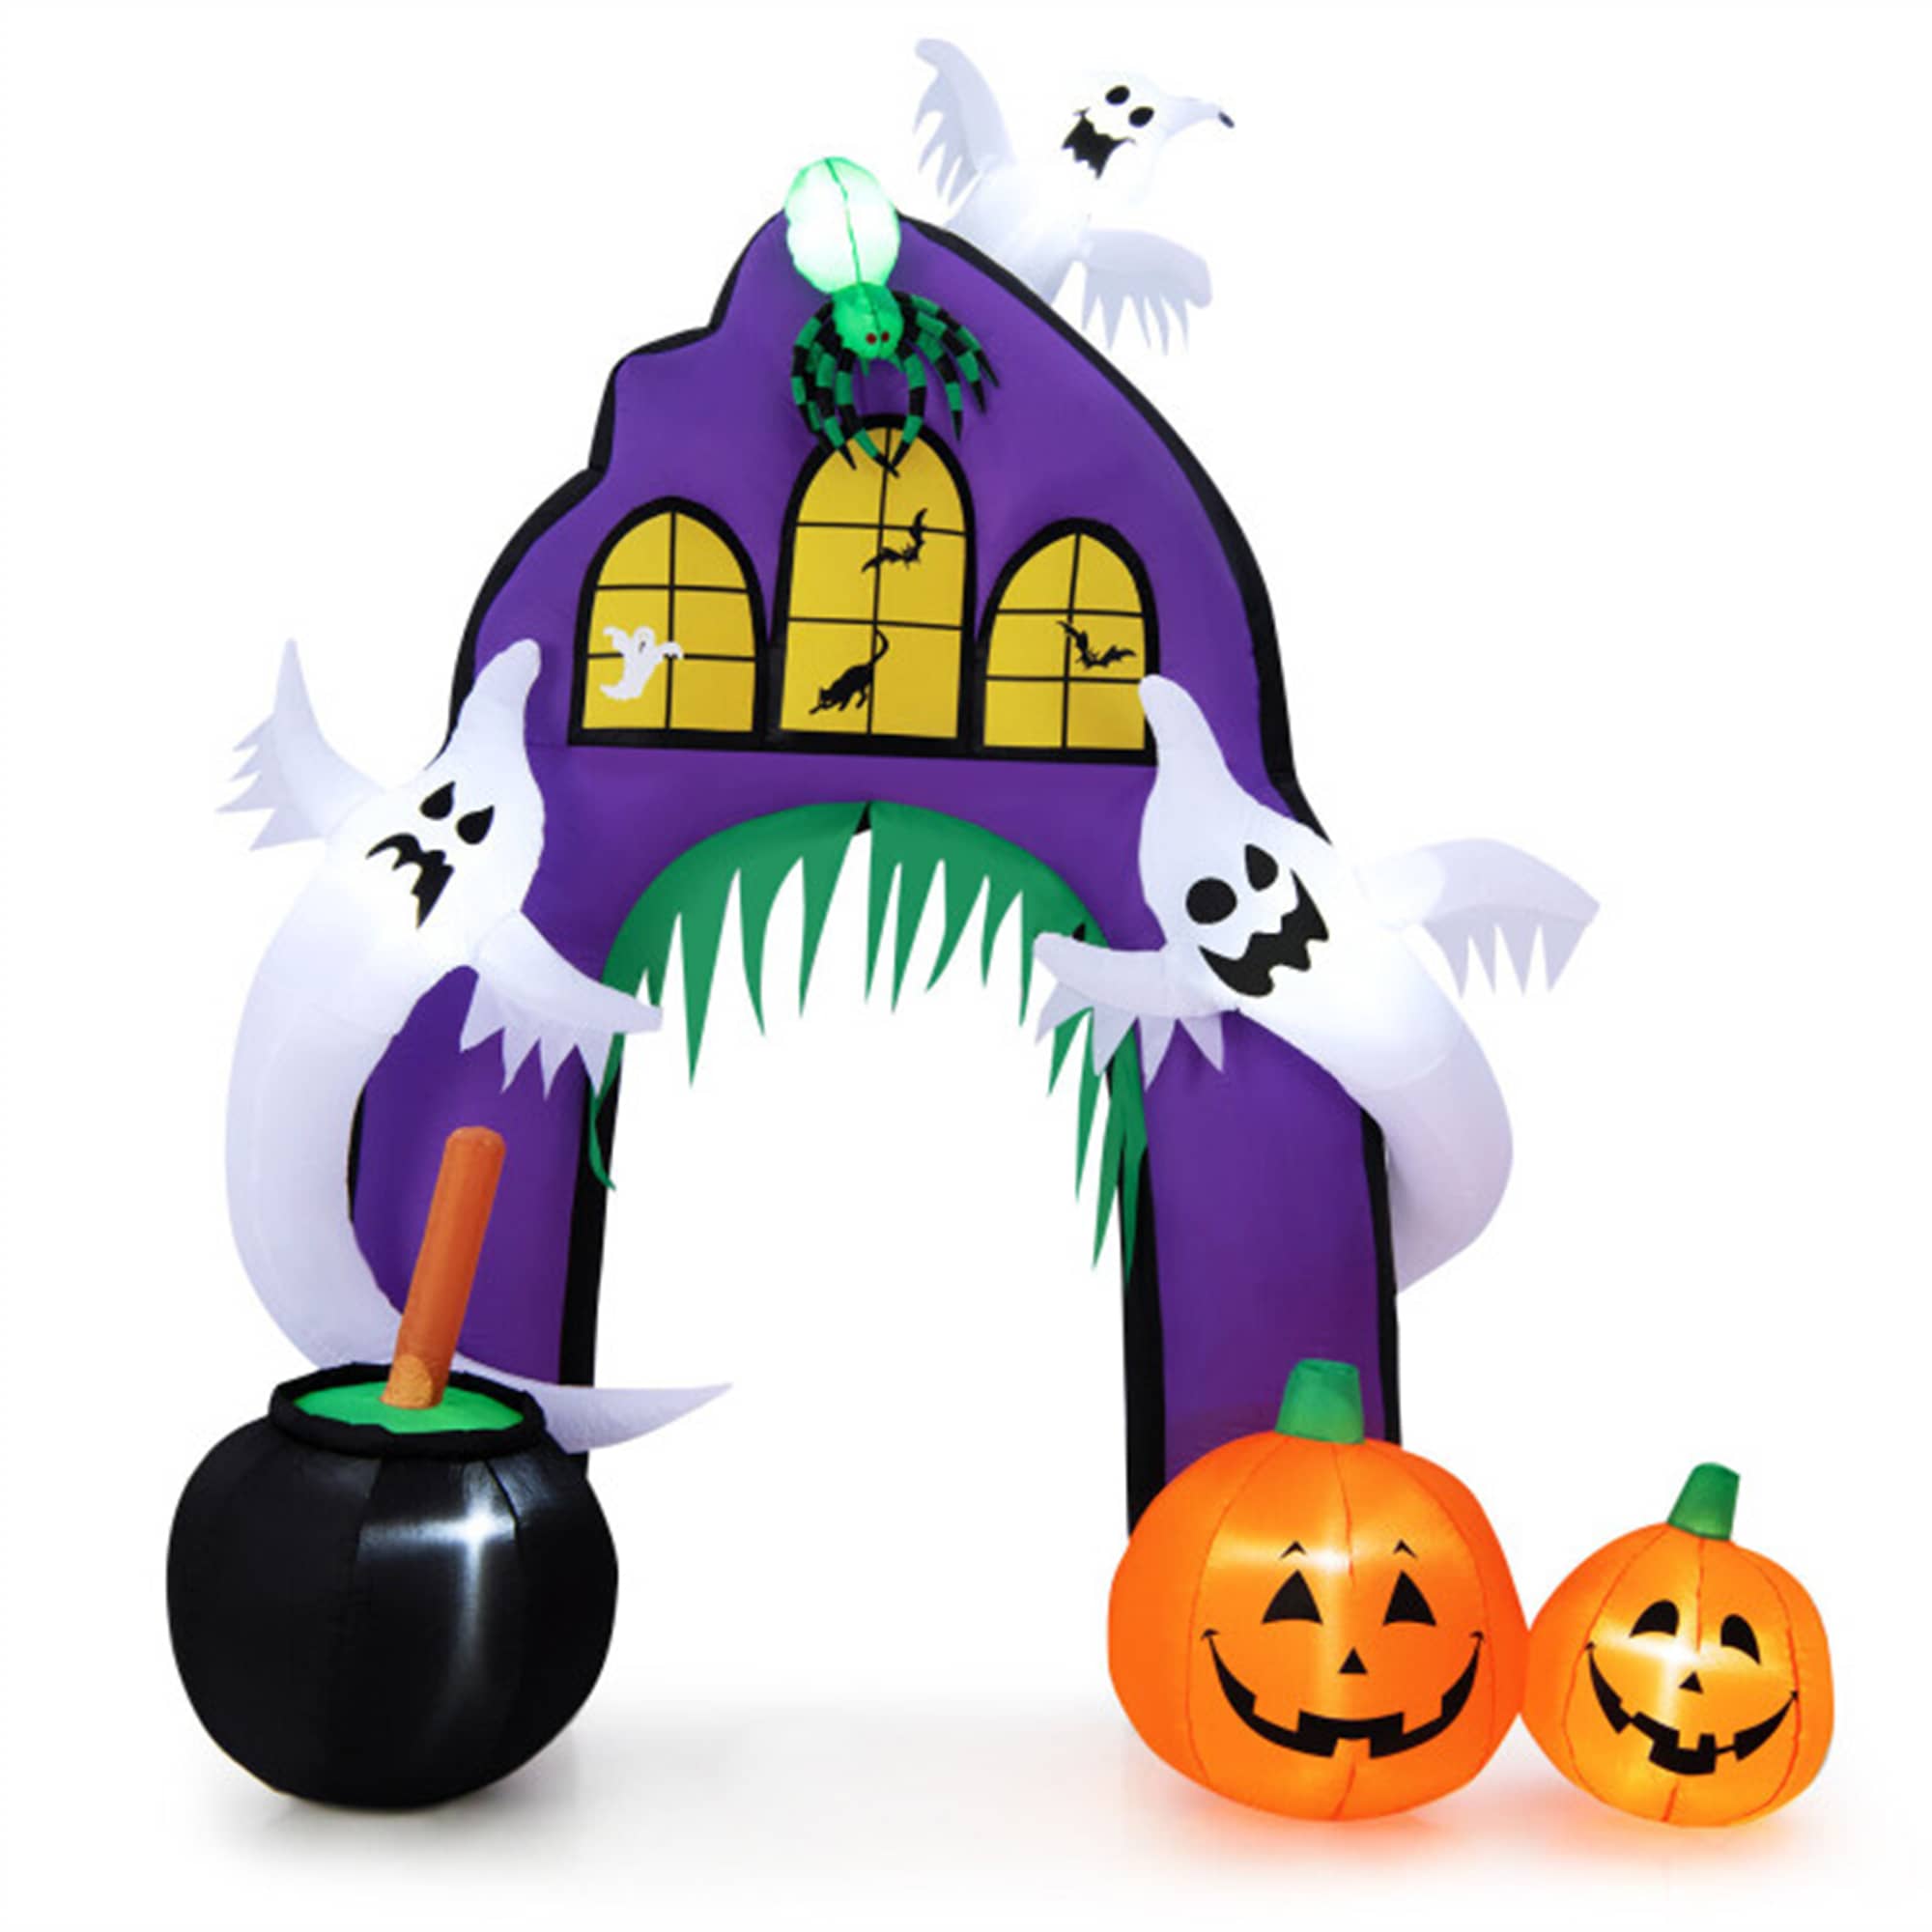 CASAINC 9 Feet Tall Halloween Inflatable Castle Archway Decor with Spider Ghosts and Built-in